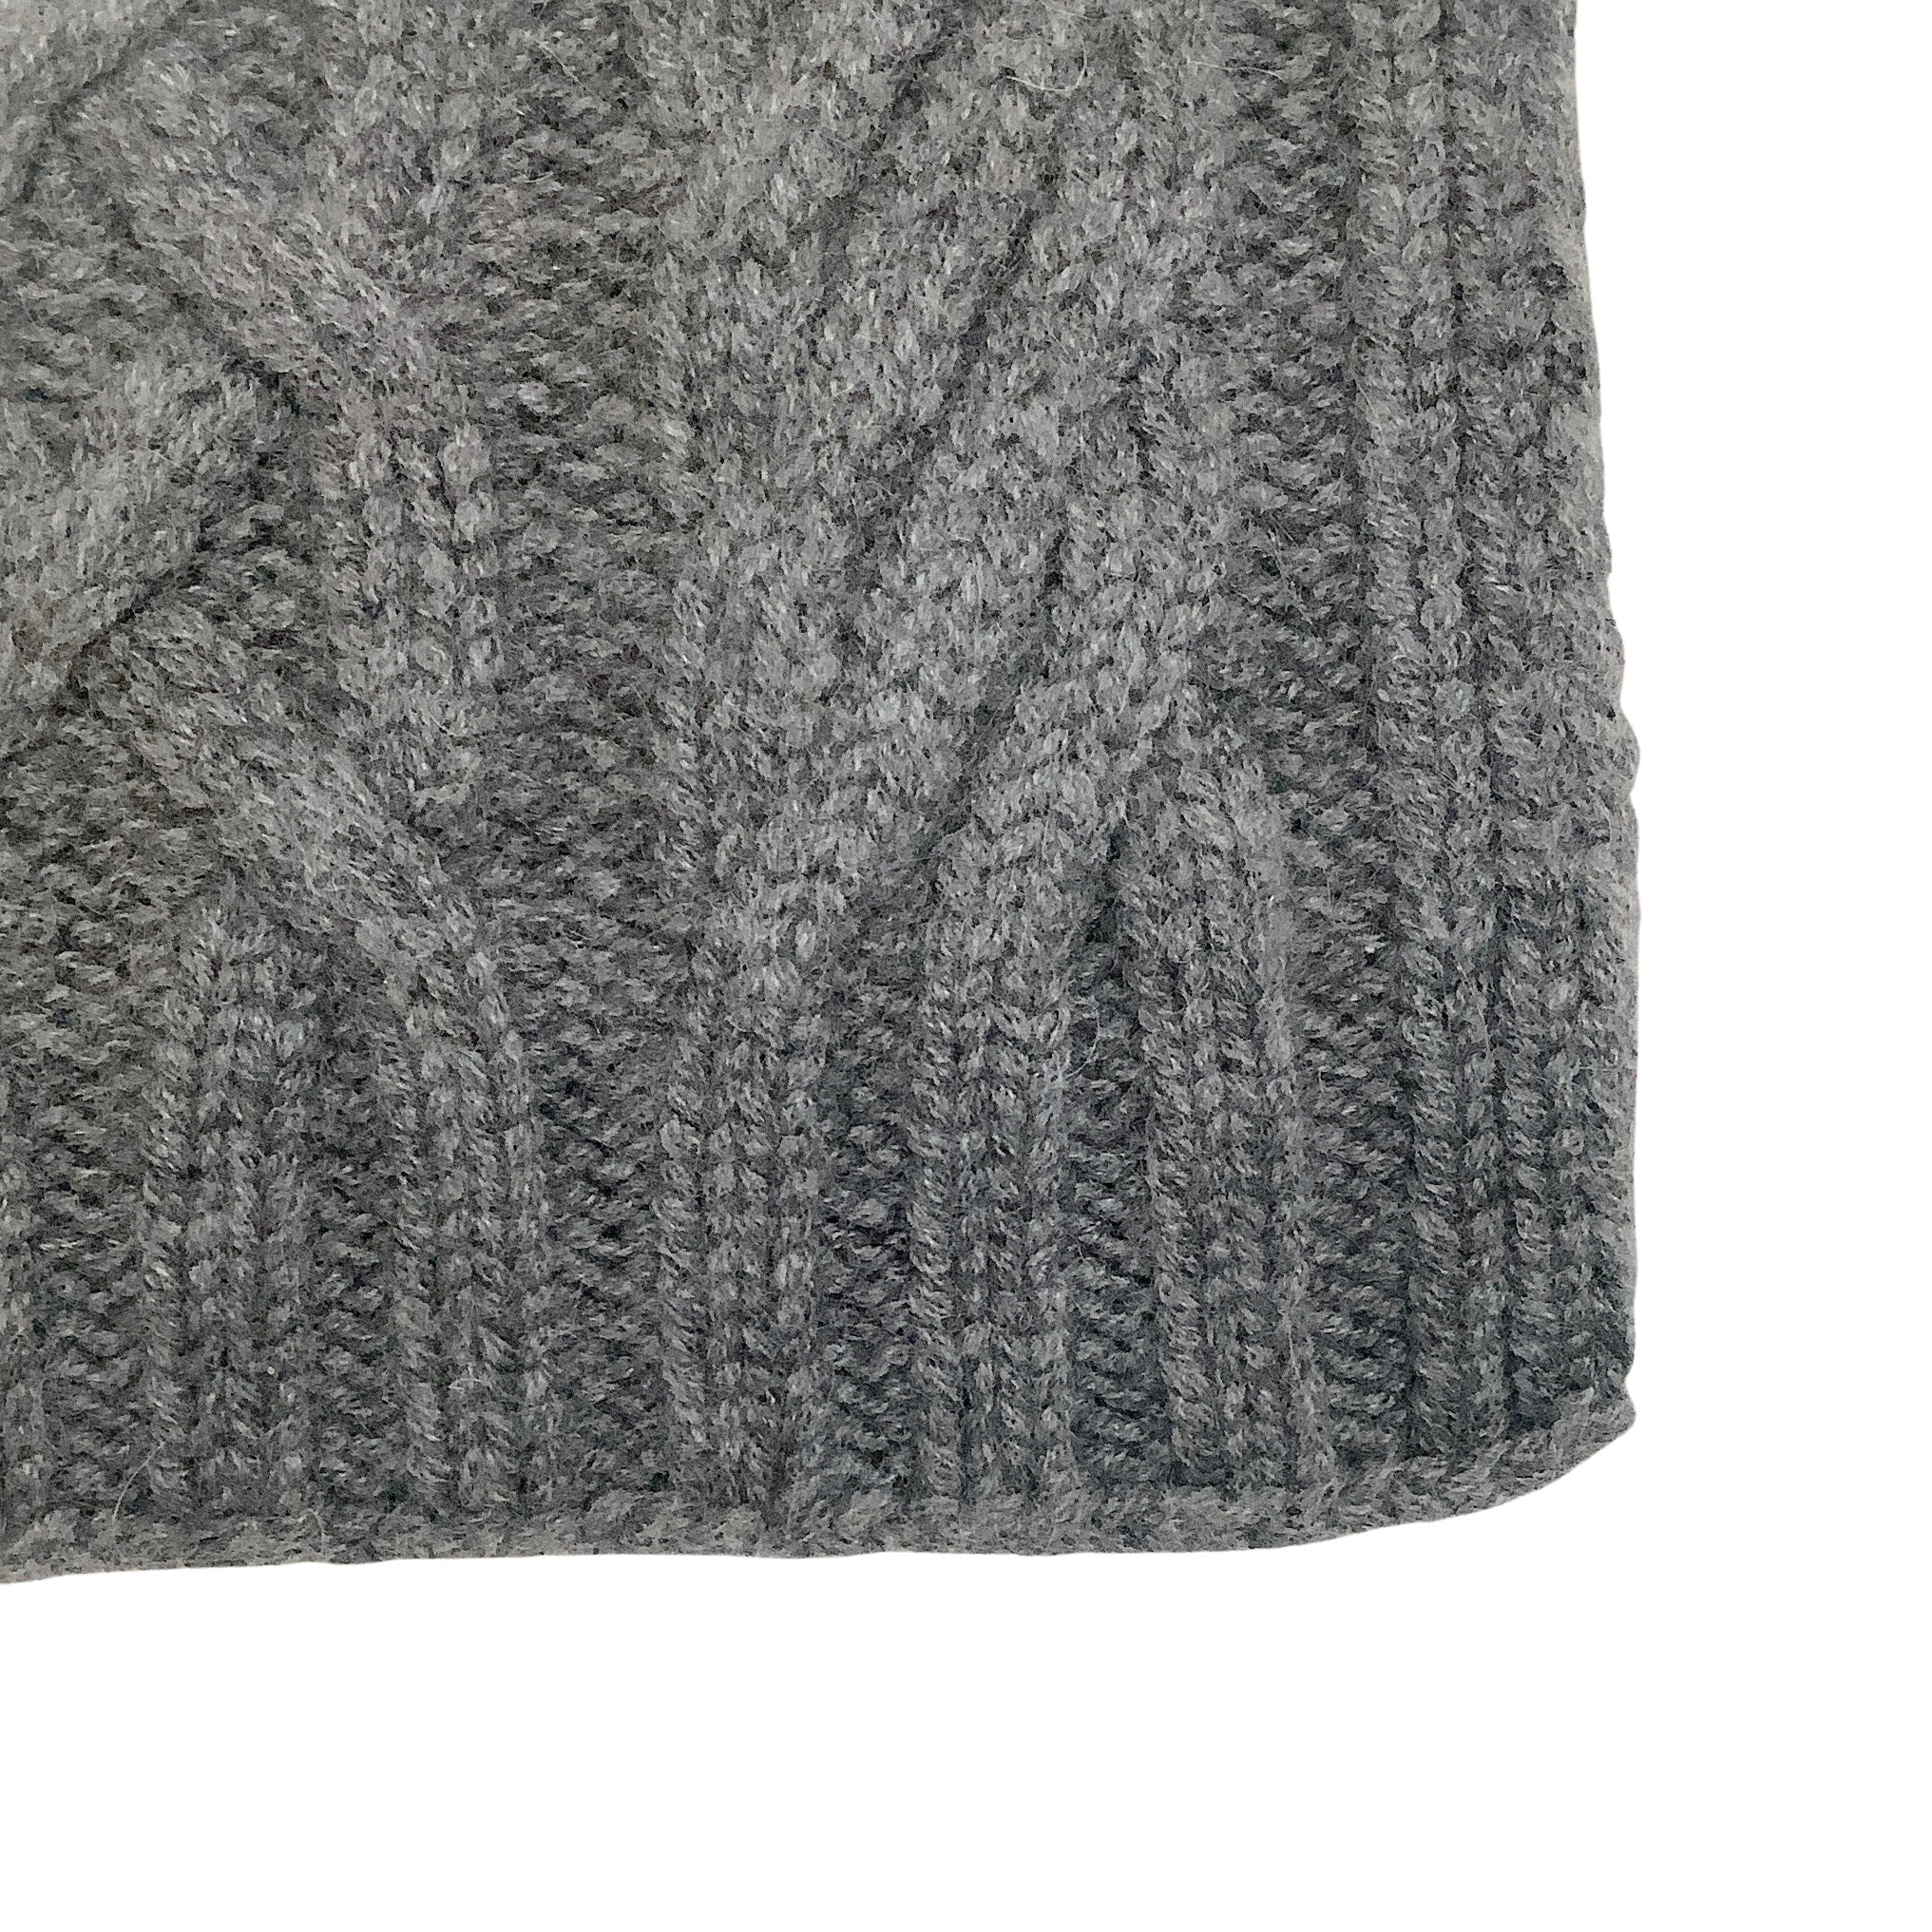 Chanel 2009 Gray Cashmere Cable Knit No 5 Scarf